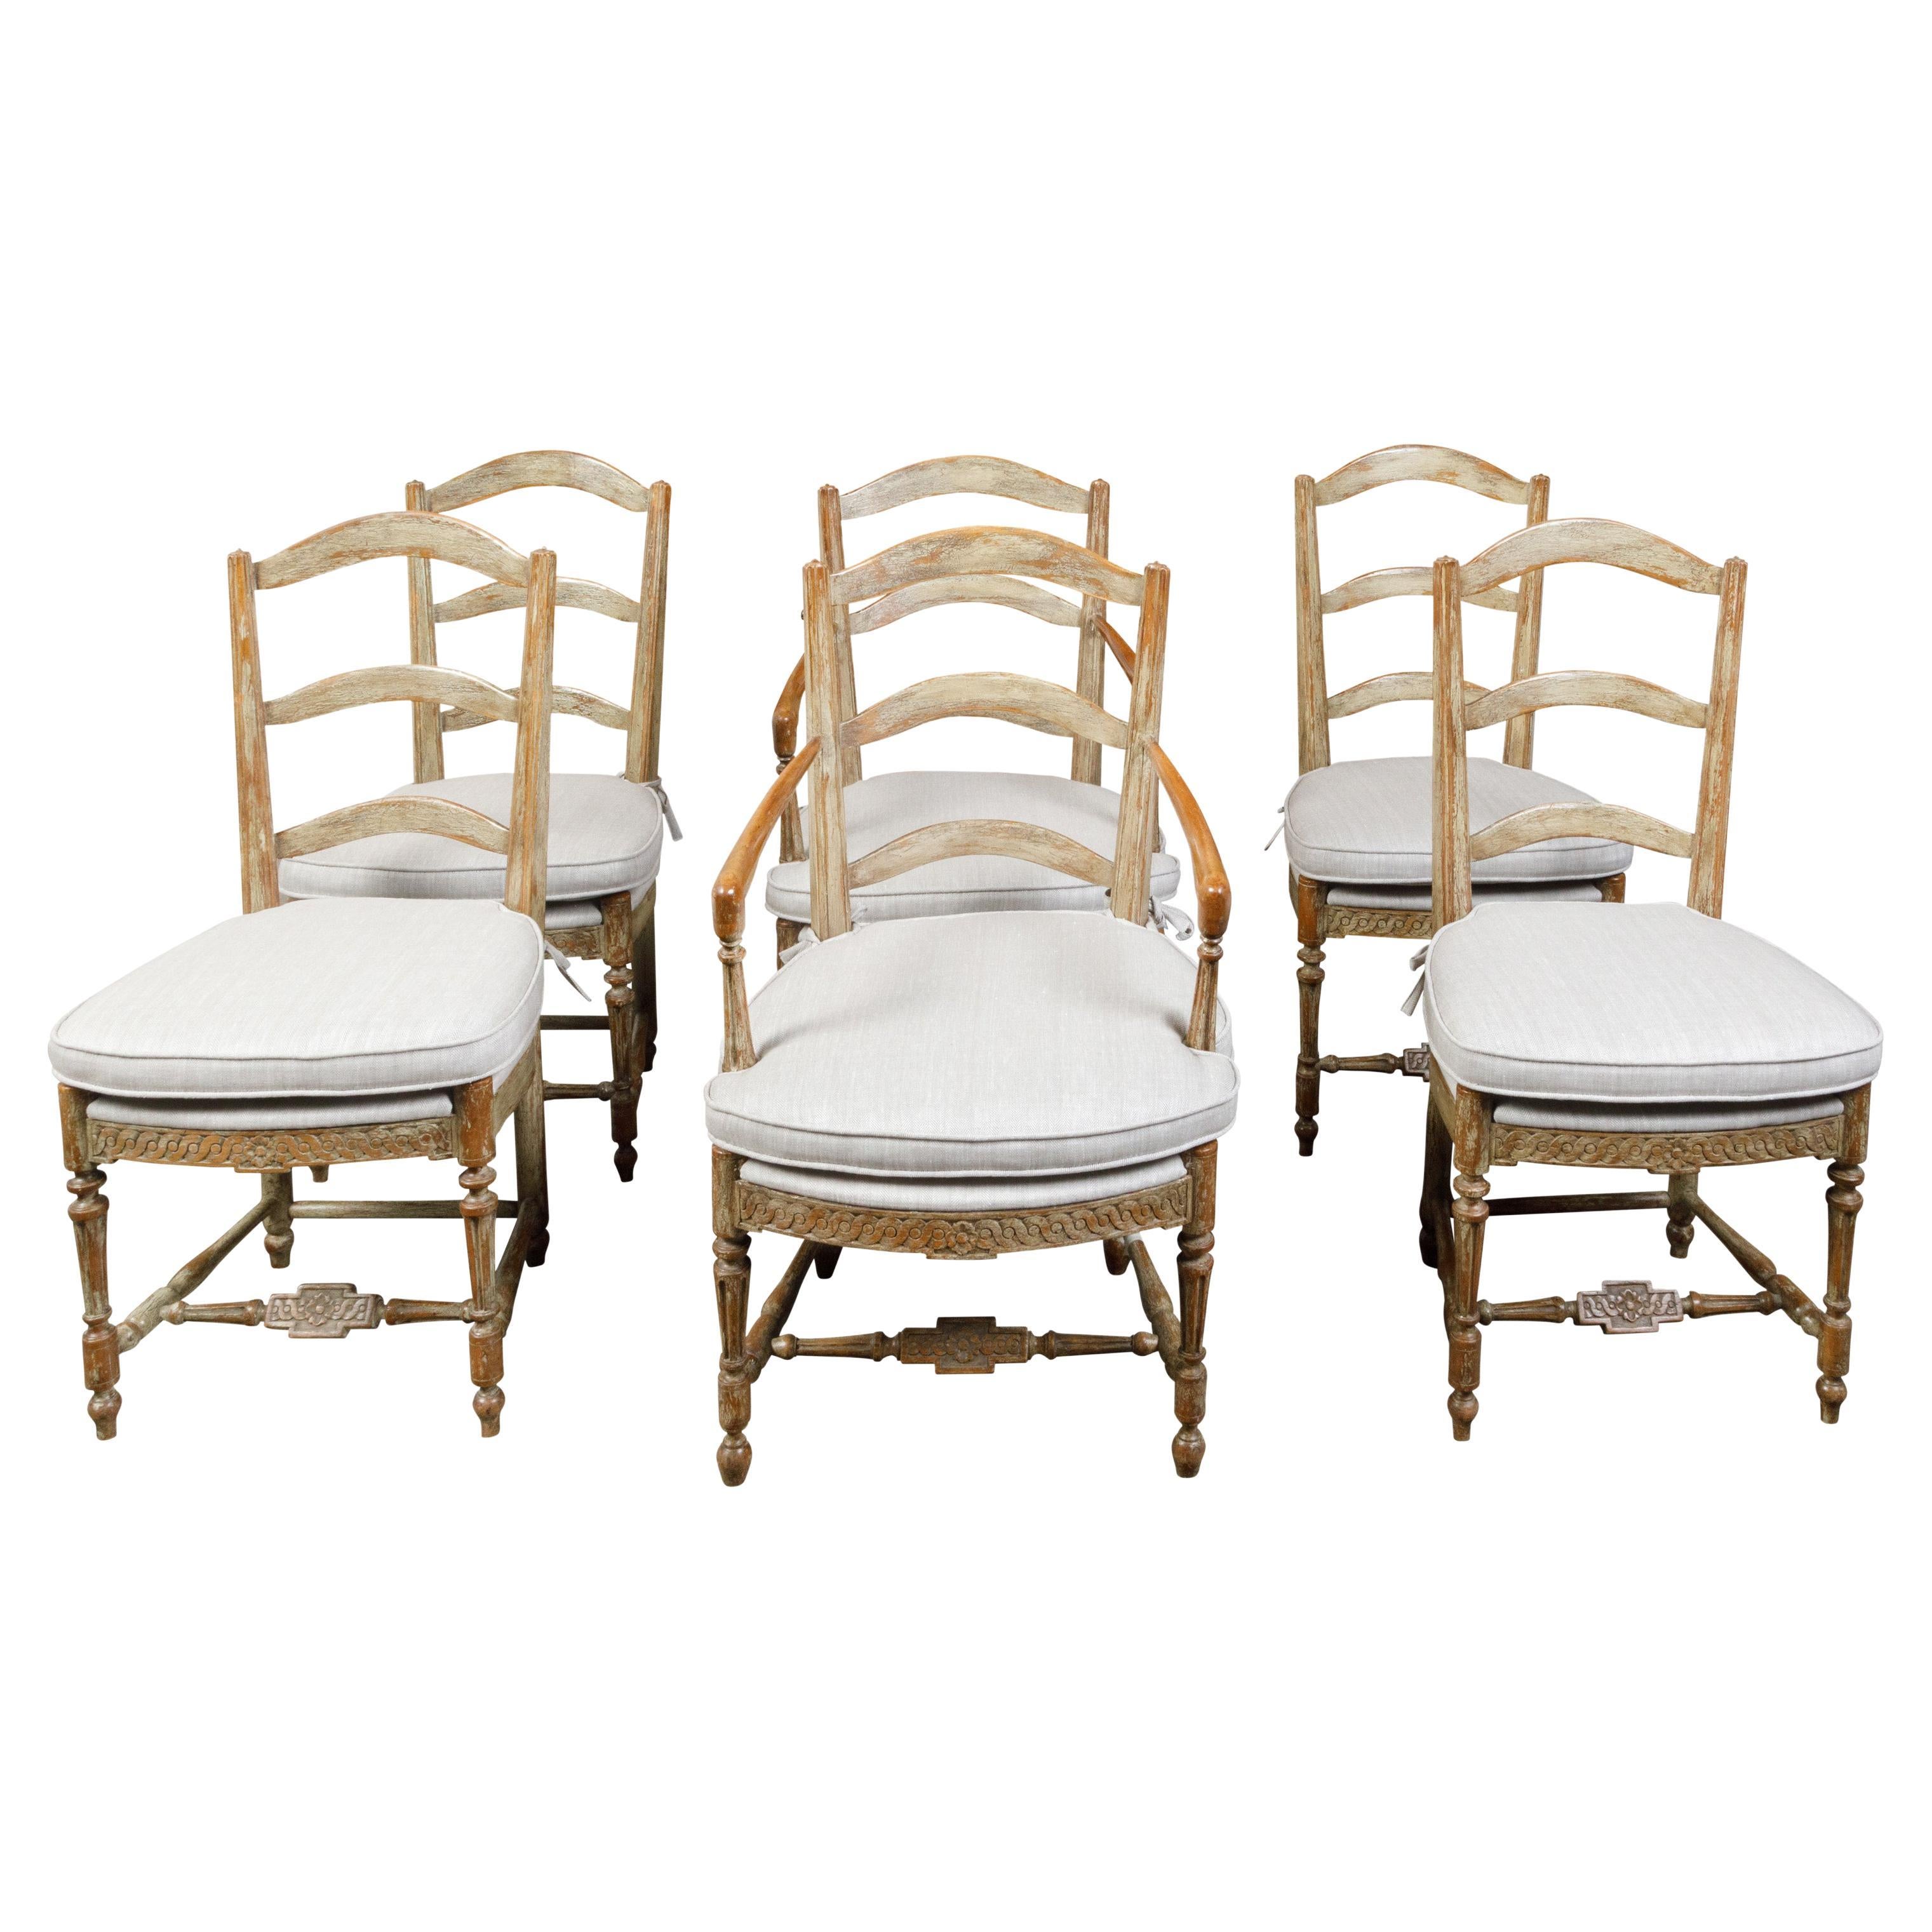 Set of Six French 19th Century Dining Room Chairs with Carved Guilloches Friezes